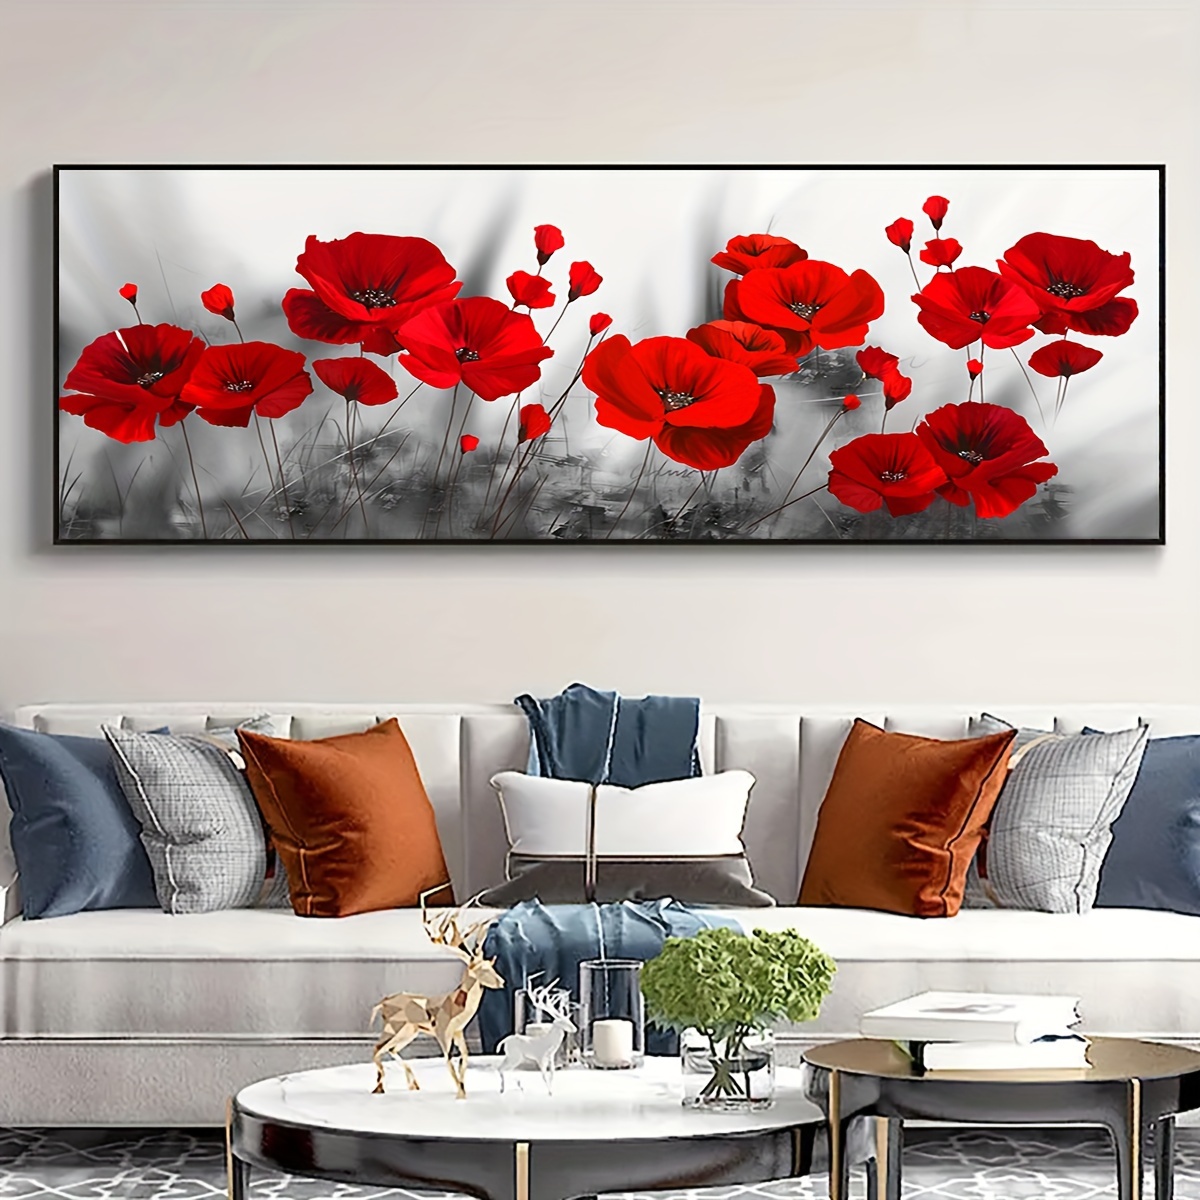 

1pc Unframed Canvas Poster, Modern Art, Blooming Red Flowers Wall Art, For Bedroom Living Room Corridor, Wall Art, Wall Decor, Winter Decor, Room Decoration